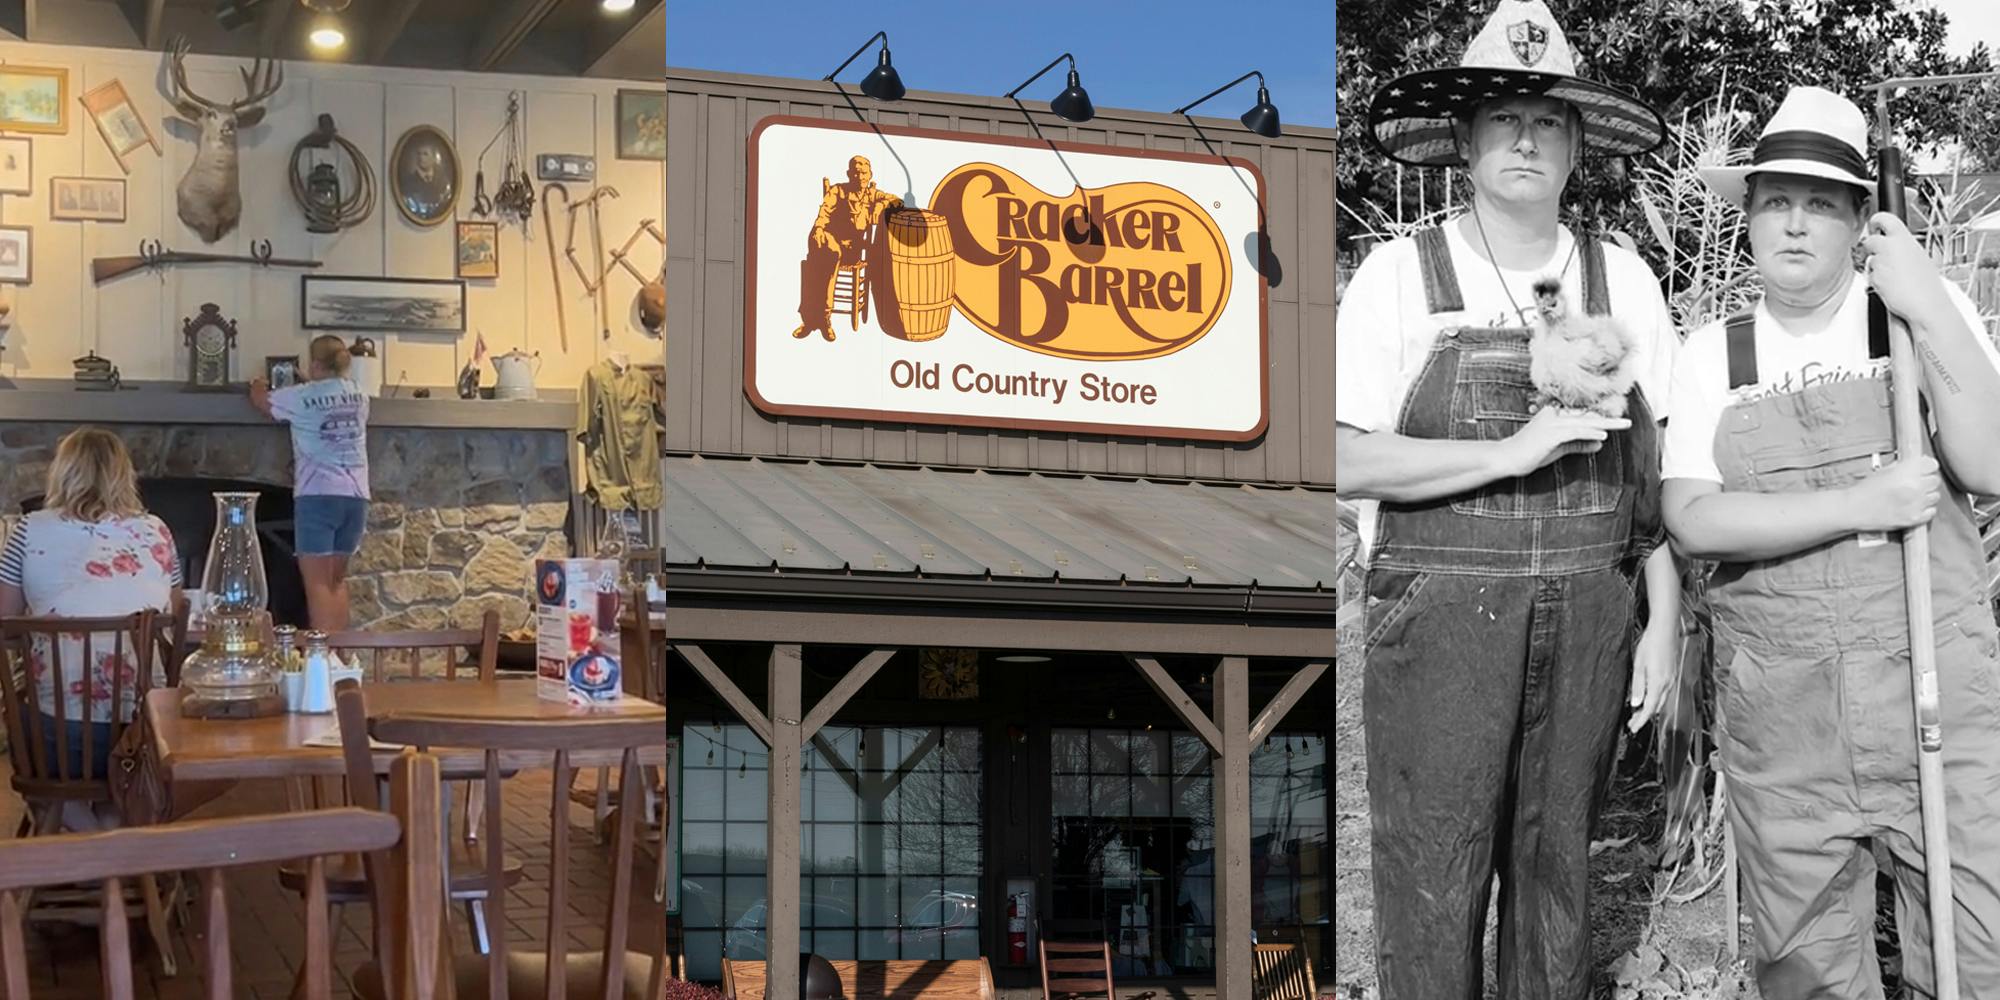 woman adding framed photo to Cracker Barrel interior wall (l) Cracker Barrel building with sign (c) Cracker barrel customers in black and white photo (r)